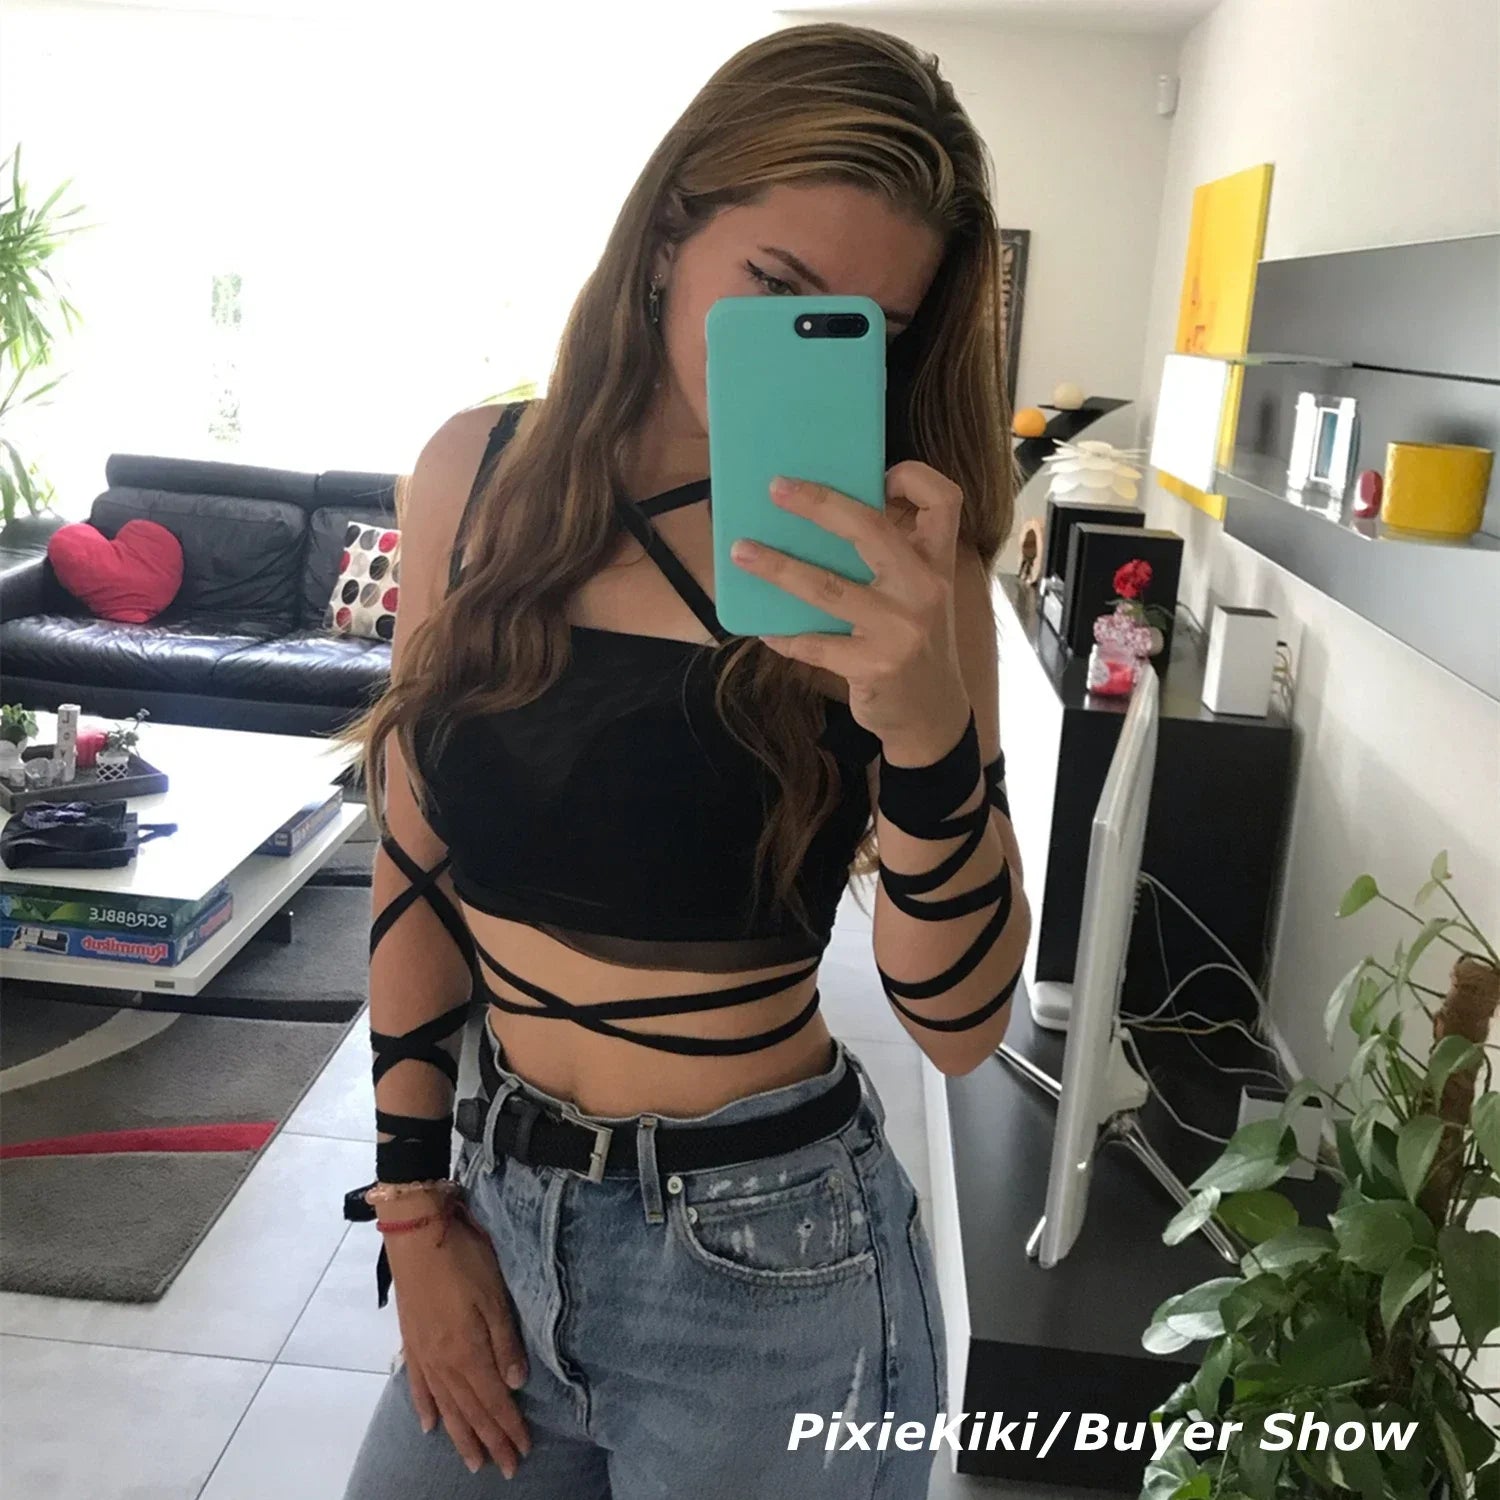 Person taking a mirror selfie in a modern living room. They are wearing a Maramalive™ Black Mesh Lace Up Bandage Crop Top Fairy Grunge Aesthetic Clothes Cyber Y2k Mall Goth Tanks Sexy Clothing P94-BZ14 and blue jeans, holding a phone with a teal case. Furniture and decor are visible in the background.